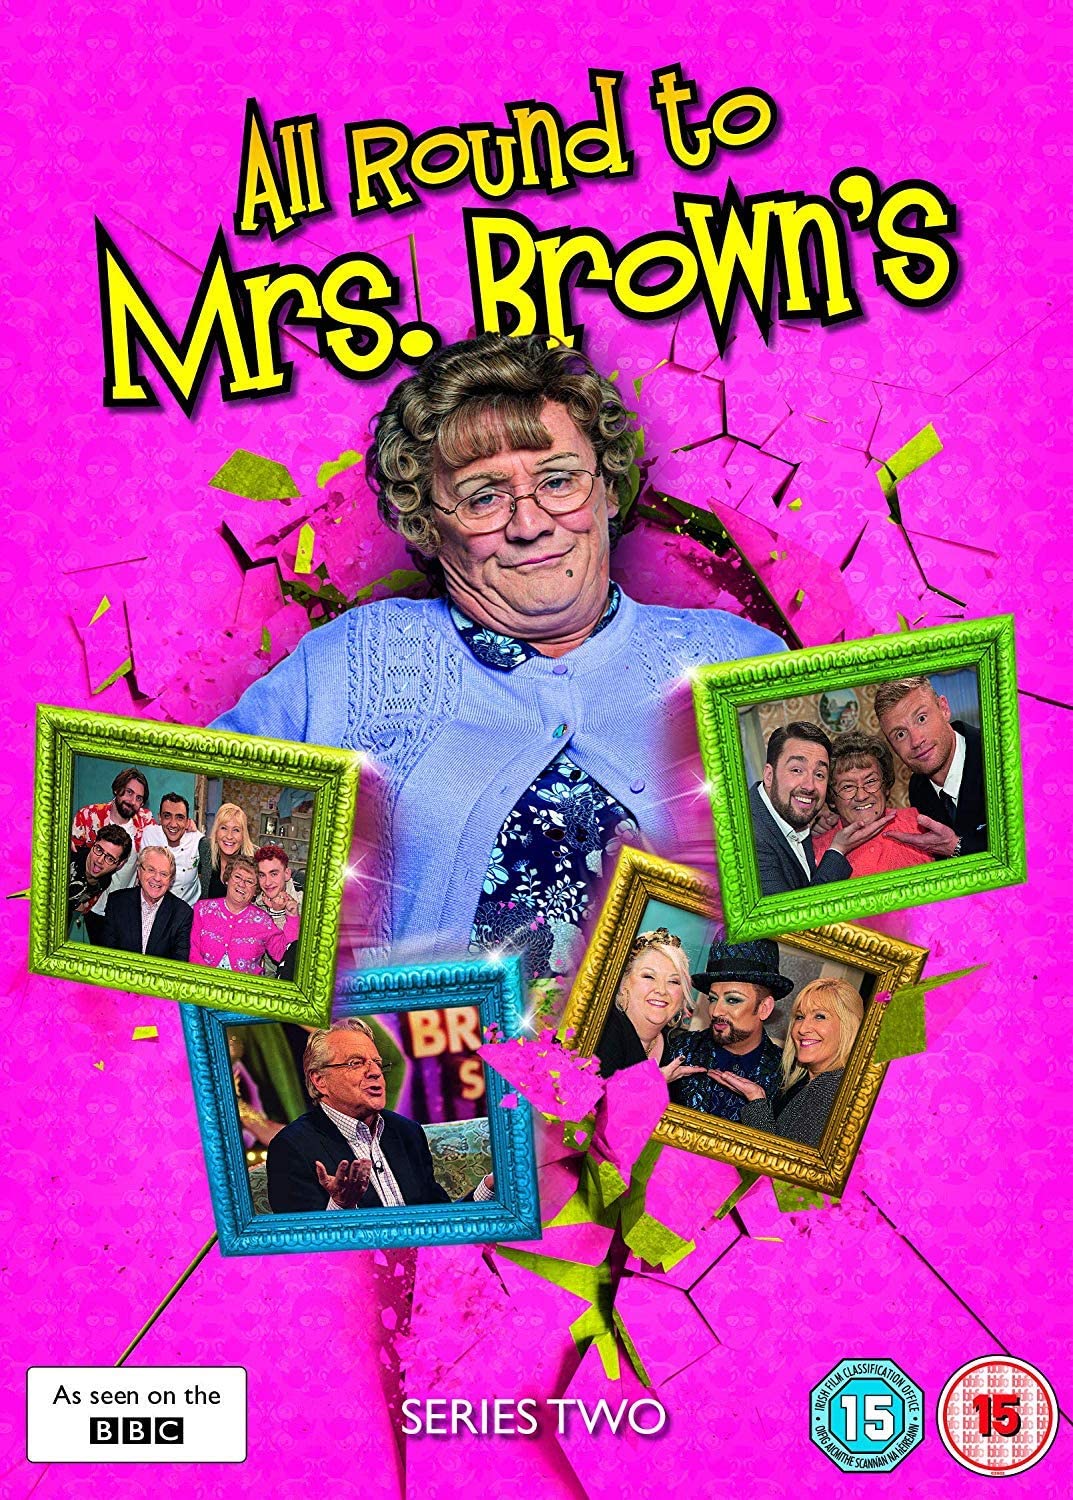 All Round To Mrs Brown's: Staffel 2